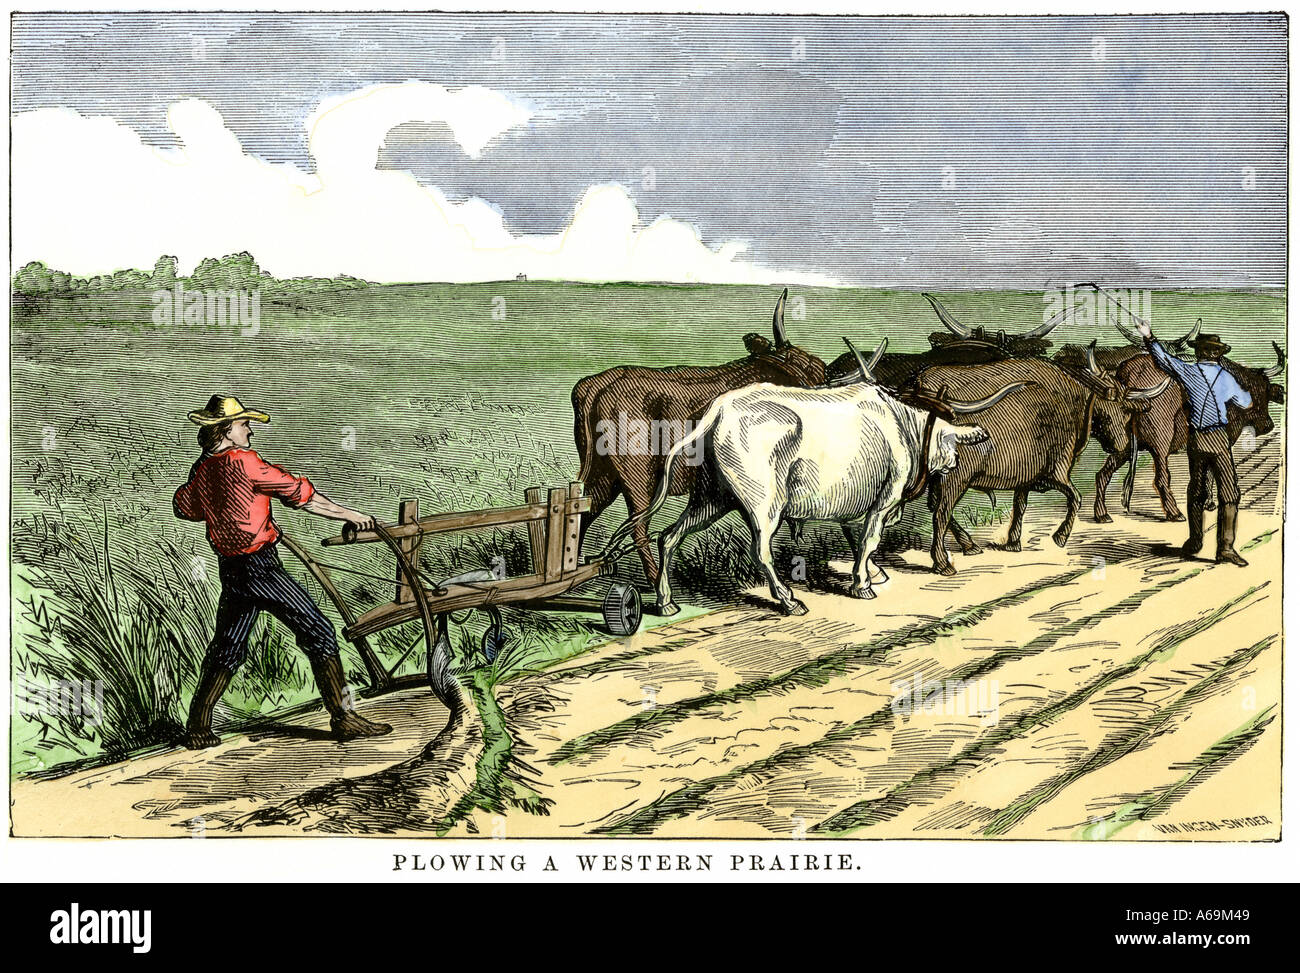 Settler plowing a western prairie 1800s. Hand-colored woodcut Stock Photo